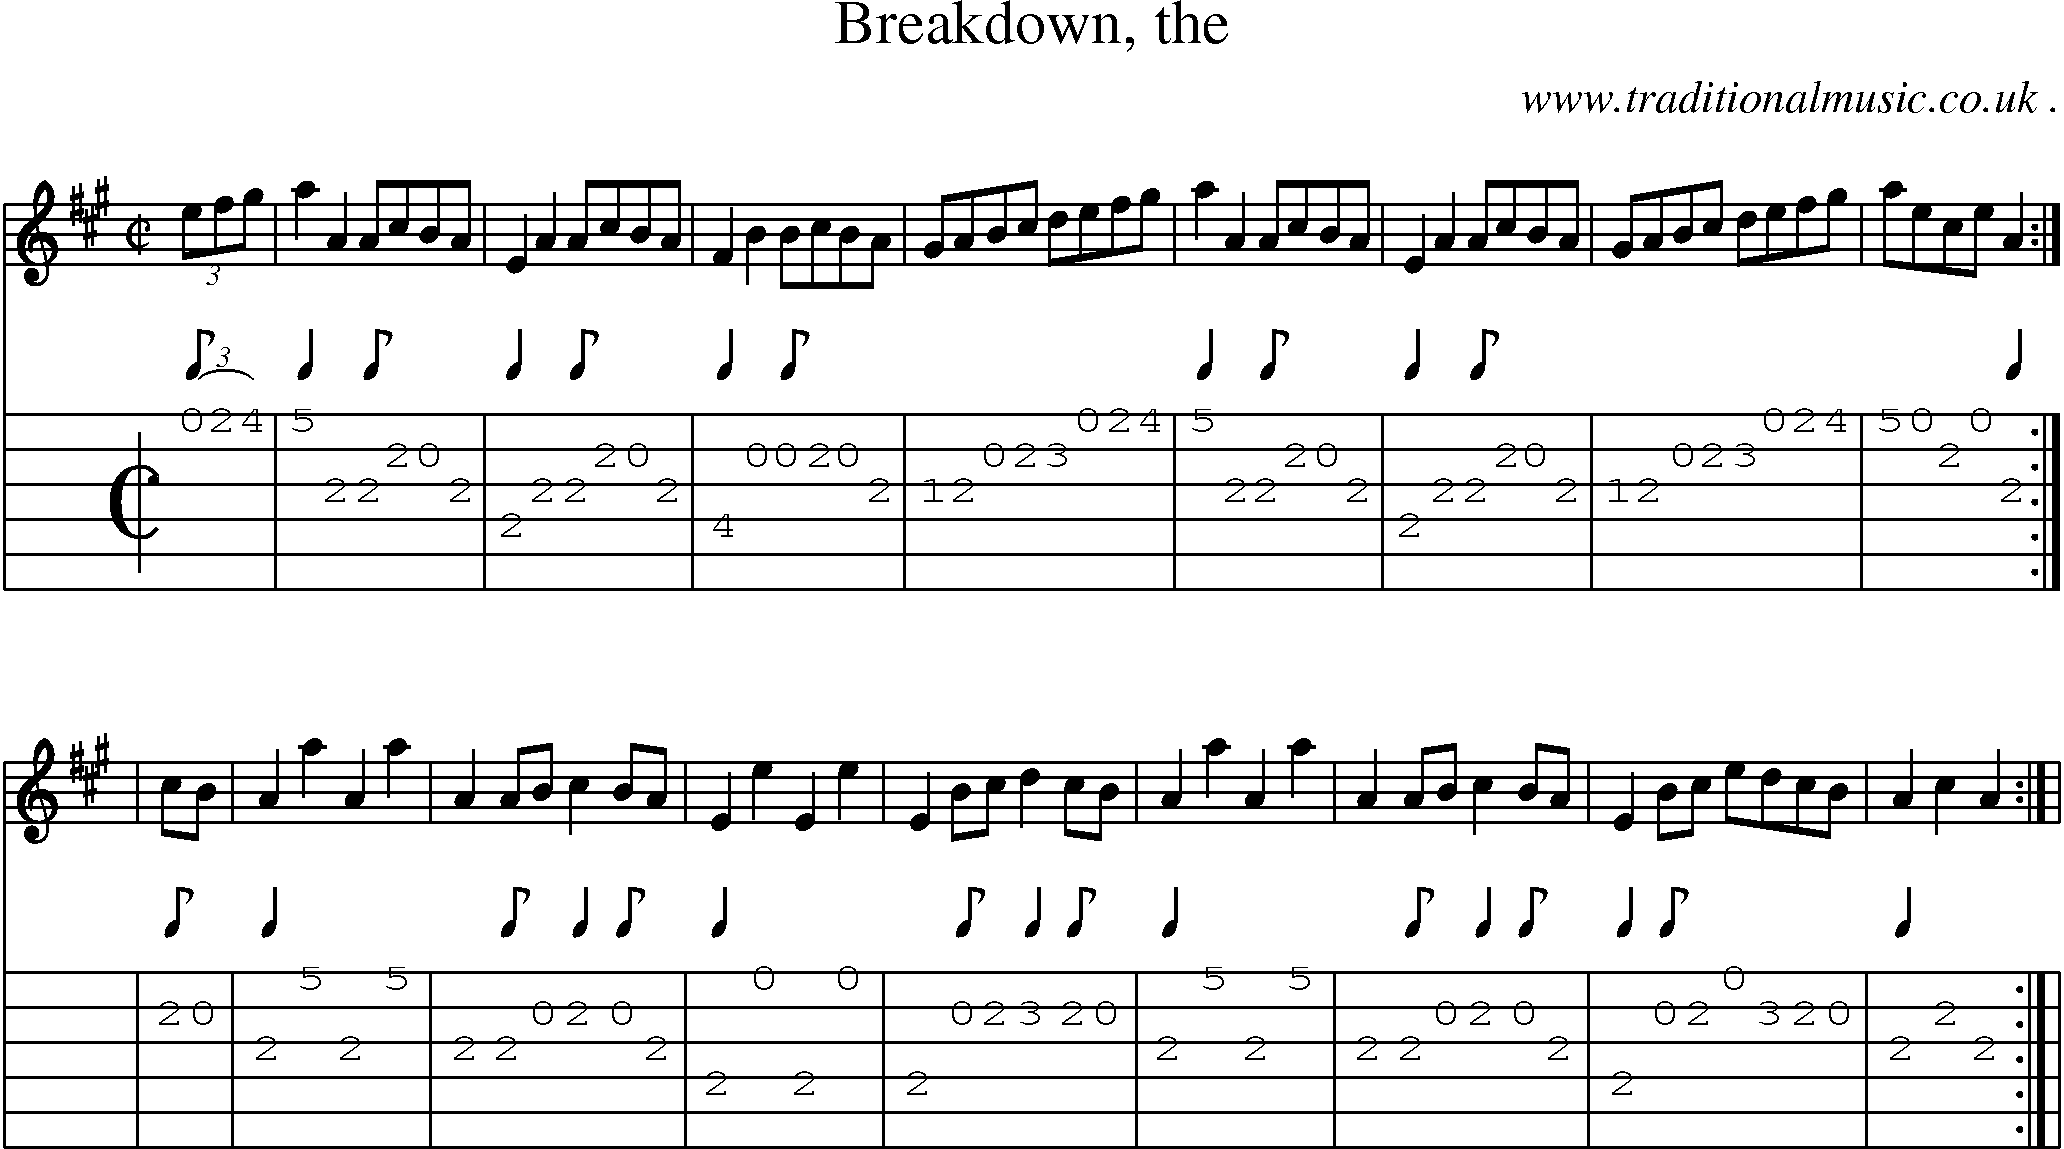 Sheet-music  score, Chords and Guitar Tabs for Breakdown The